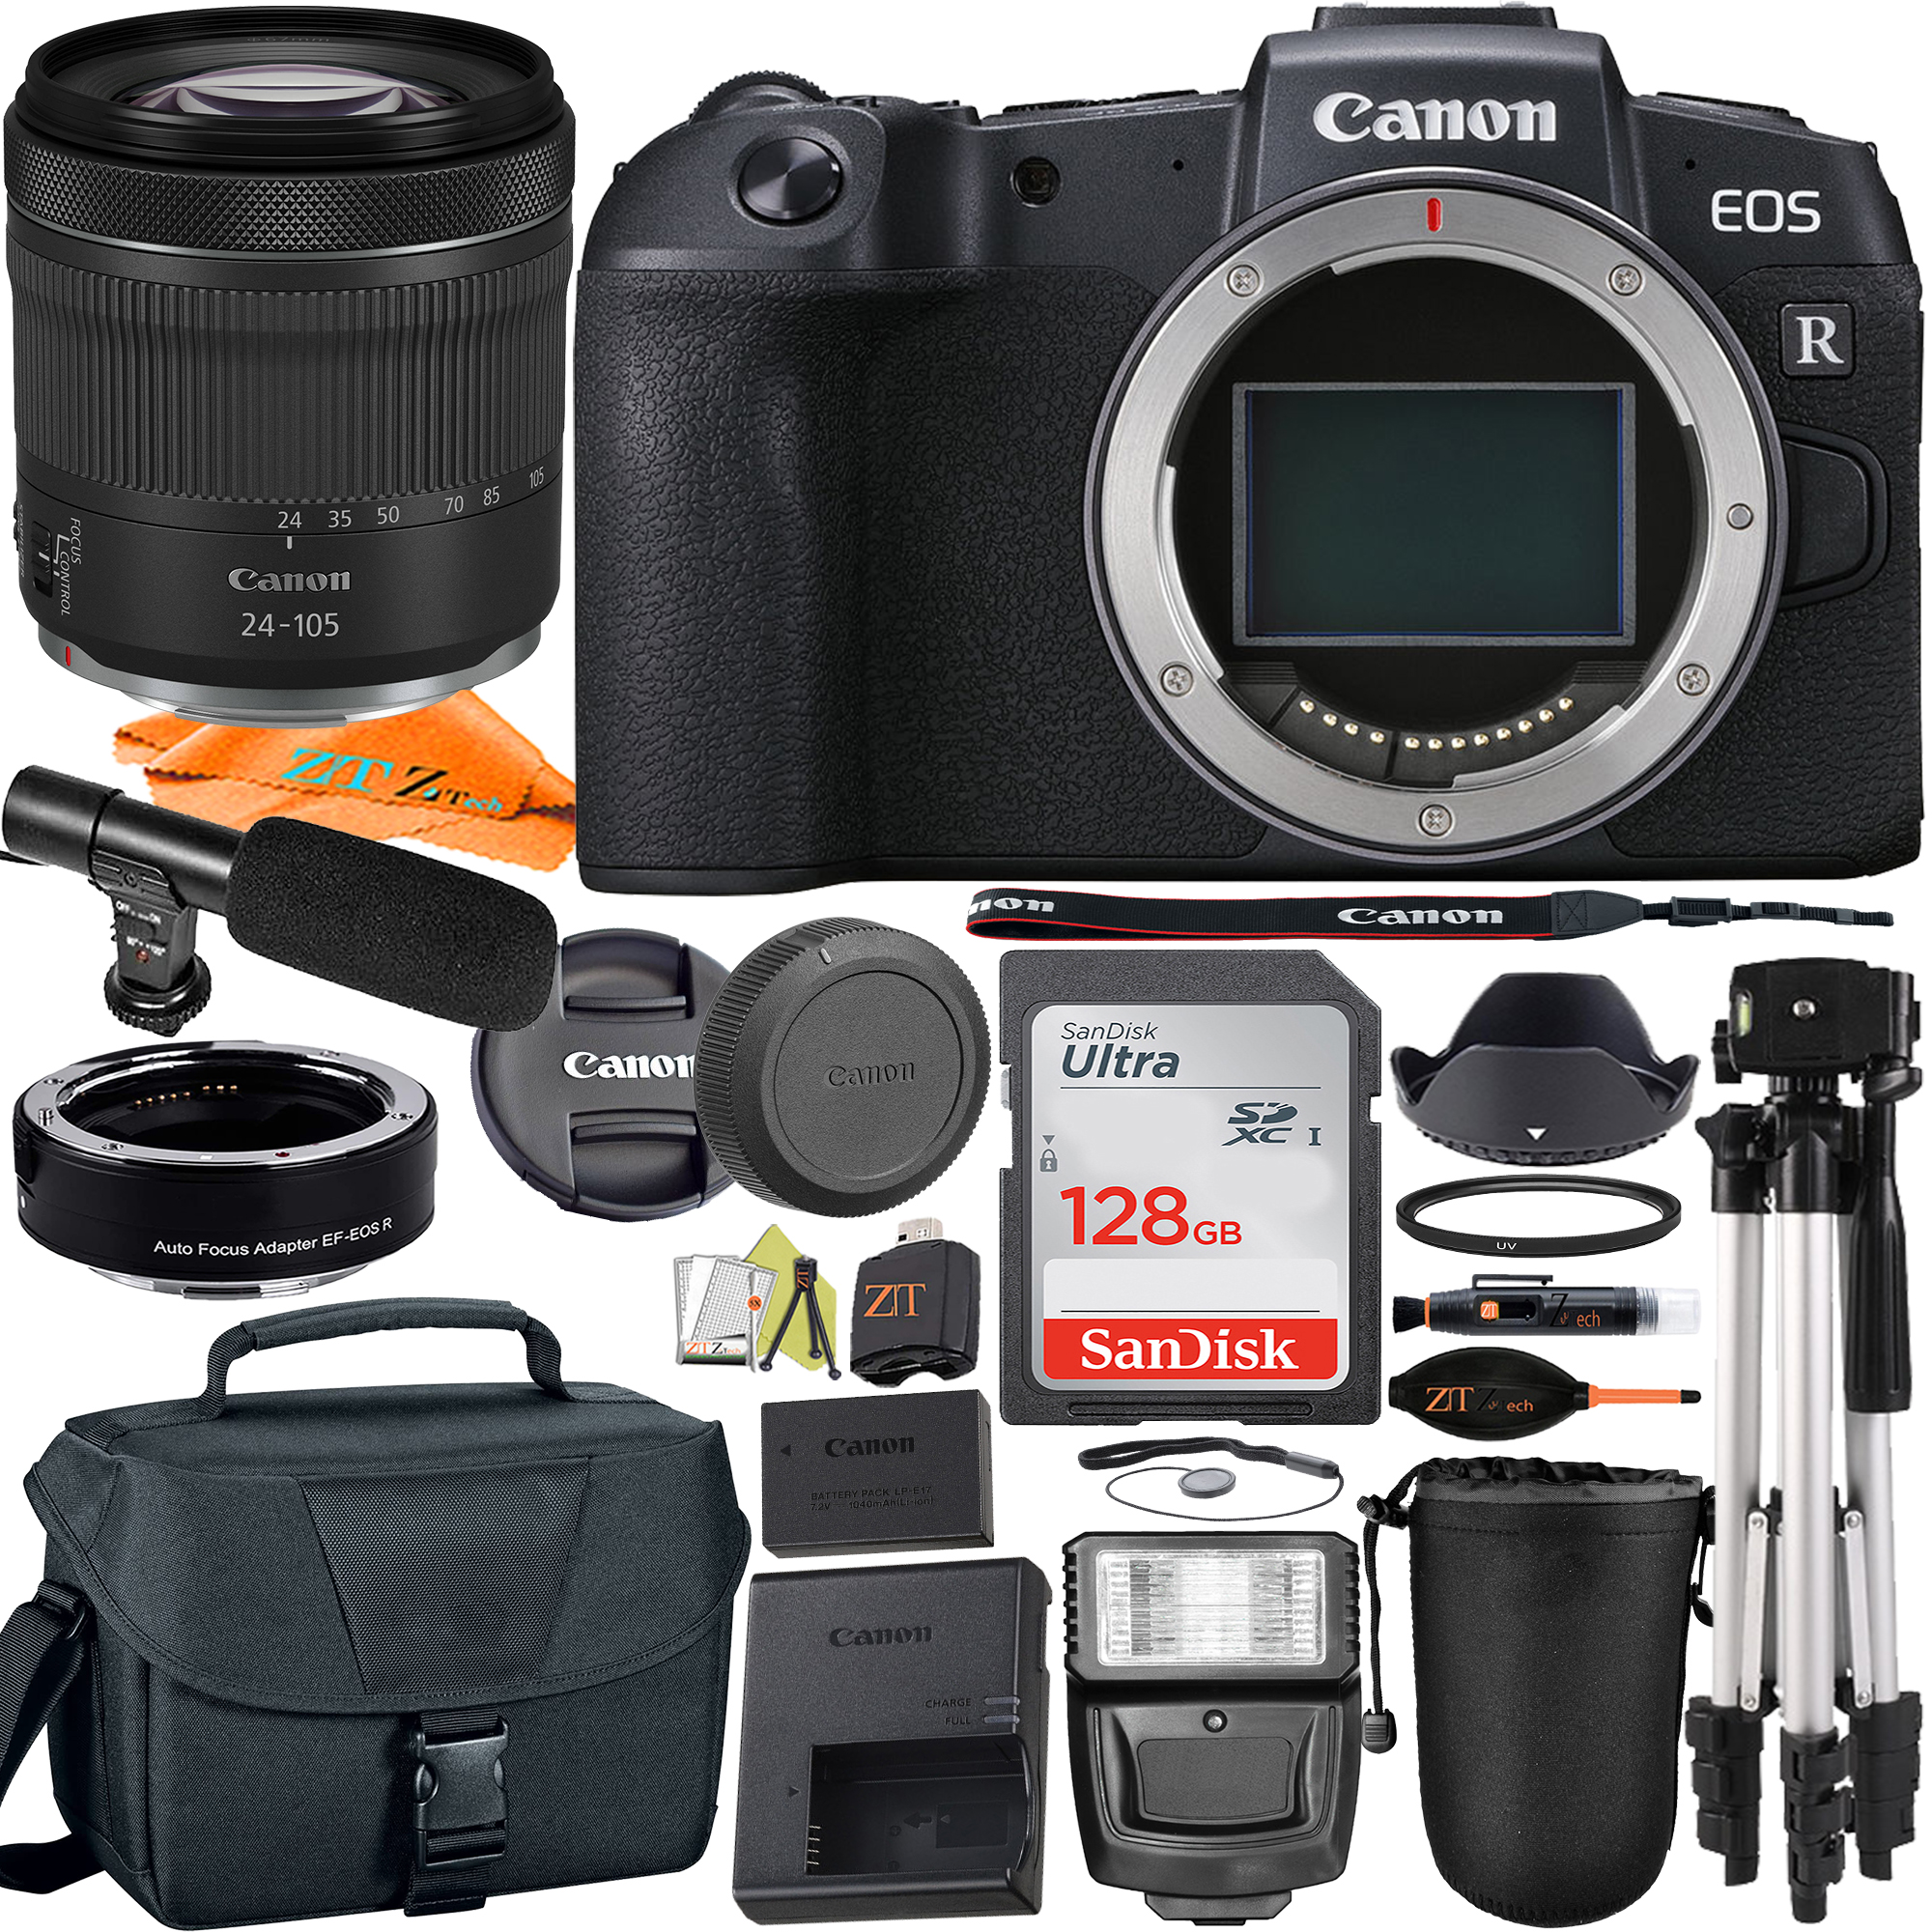 Canon EOS RP Mirrorless Digital Camera with RF24-105mm Lens + Mount Adapter + SanDisk 128GB + ZeeTech Accessory Bundle